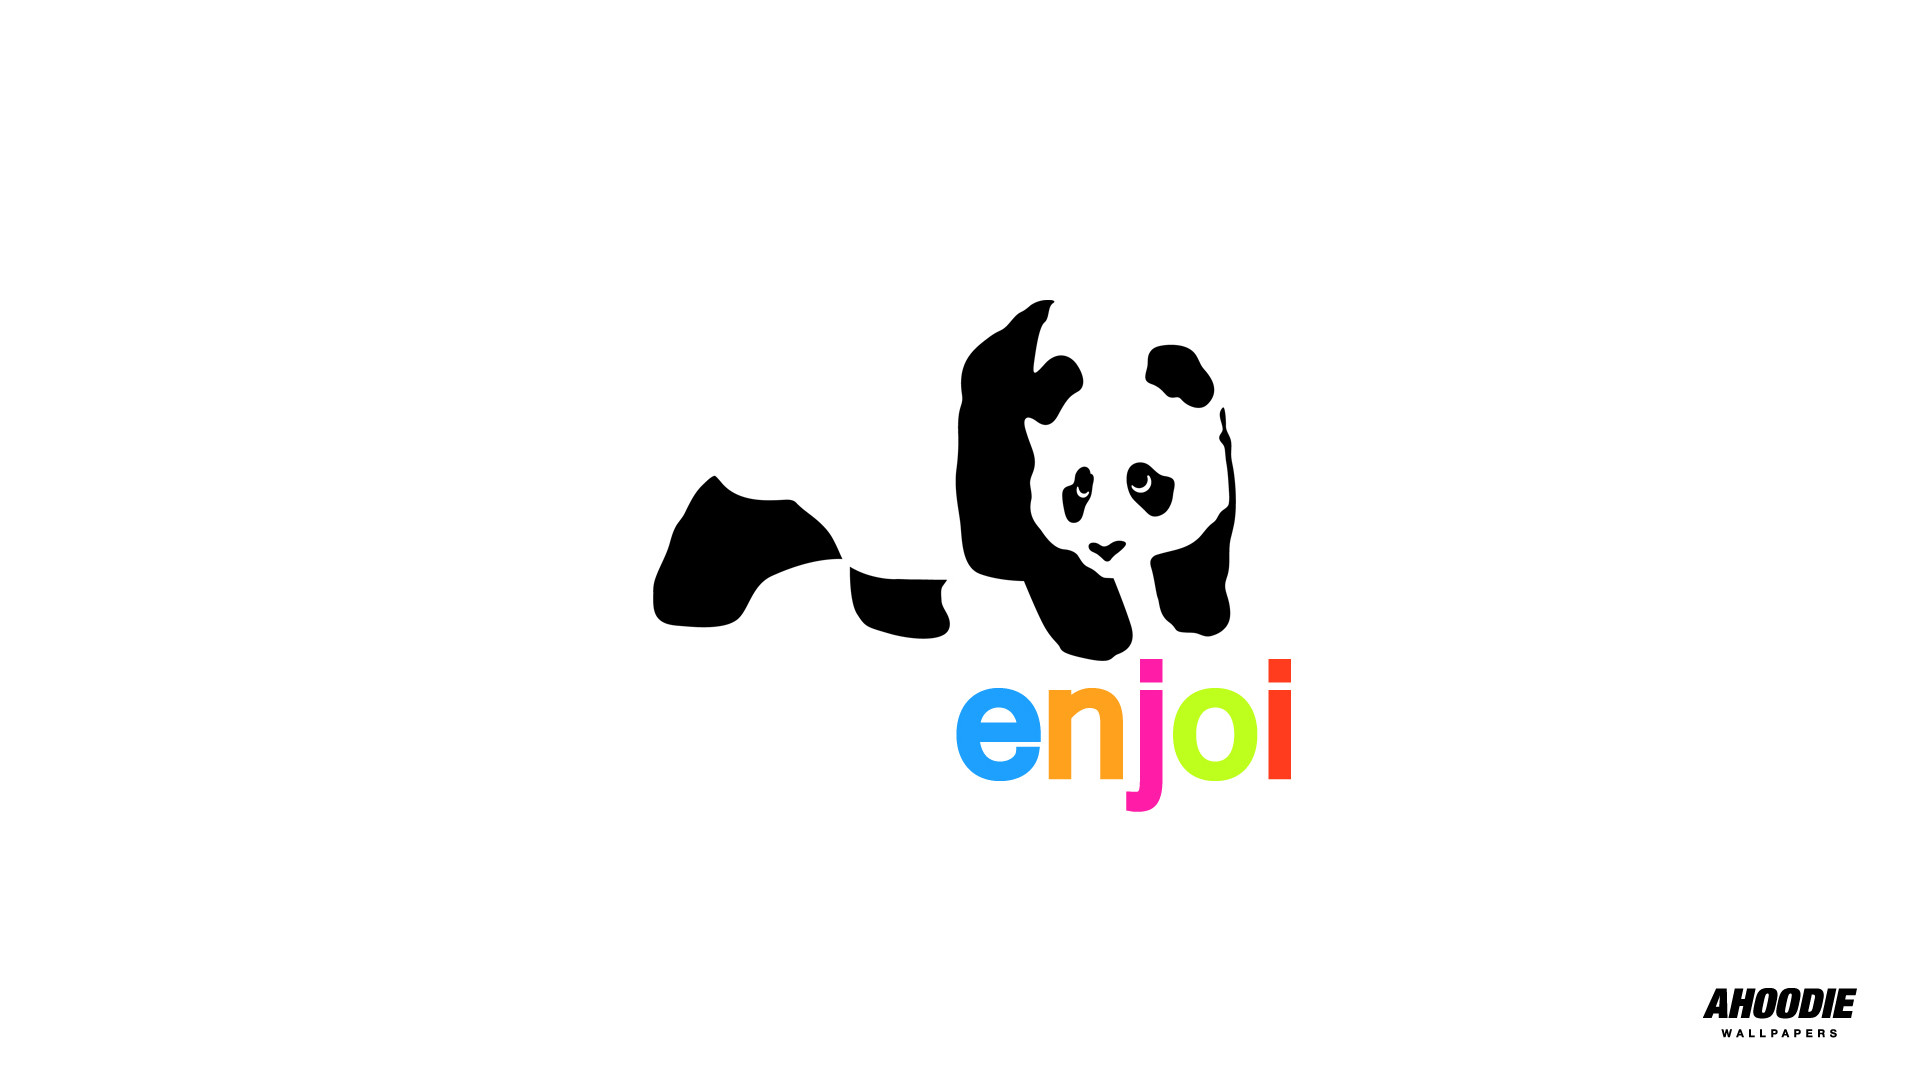 Enjoy, the company, not only uses the panda as a SYMBOL, like Apple. But  the symbol itself stripped away from the brand, is a perception and compos…